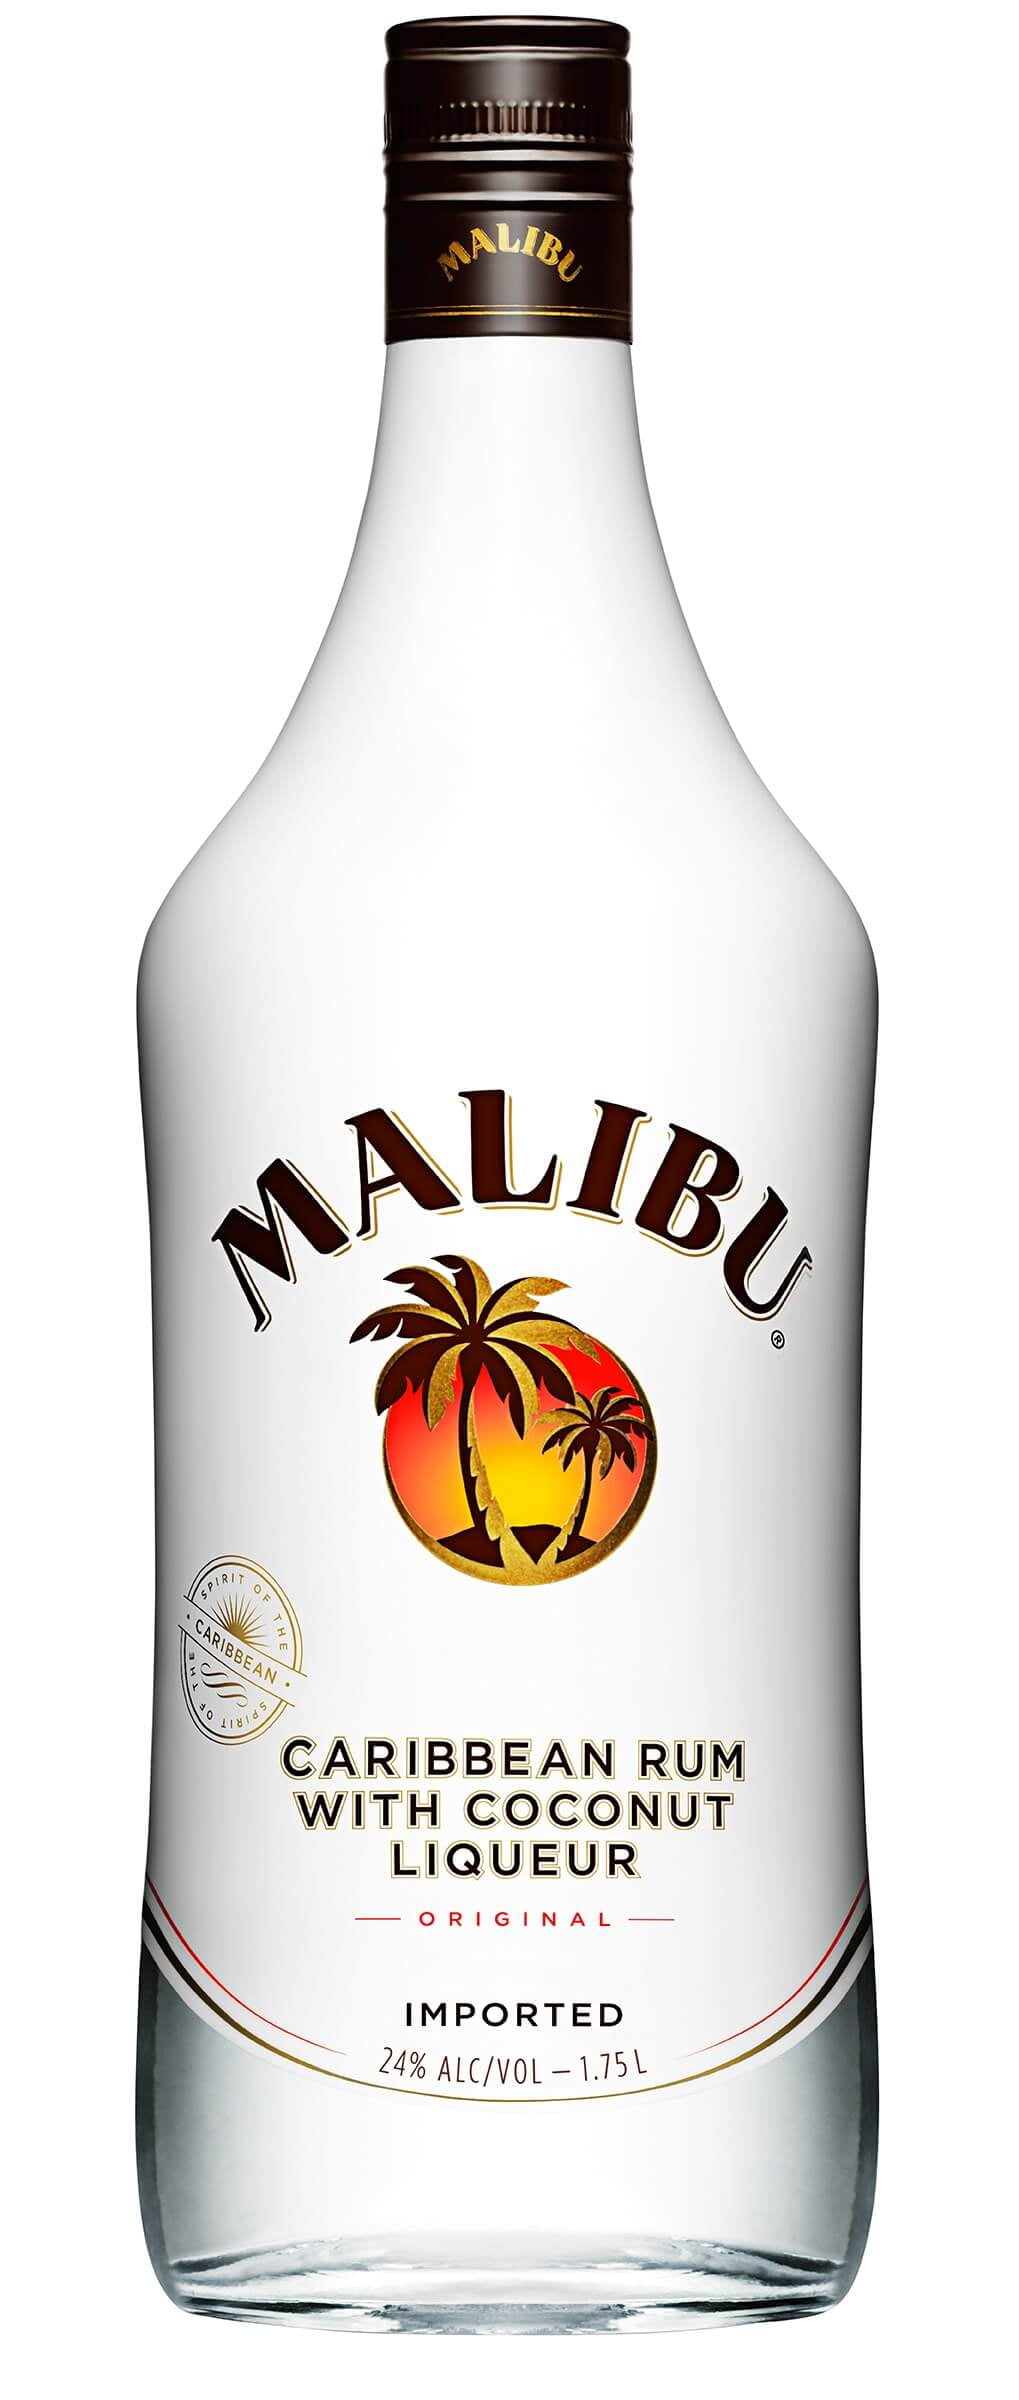 This! 10+  Hidden Facts of Drinks With Malibu Coconut Rum! Tasty coconut rum mixed drinks.